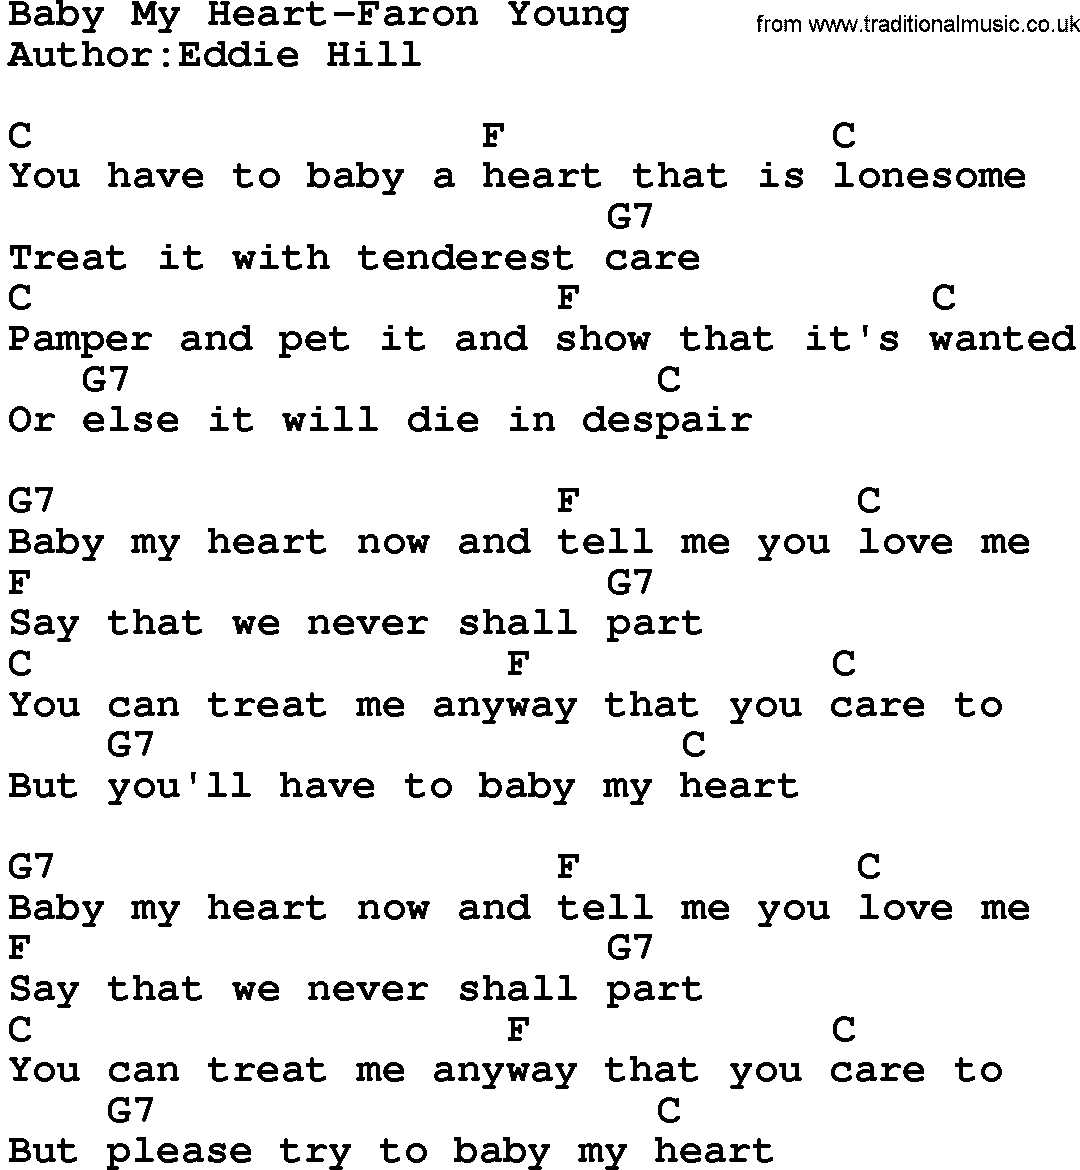 Country music song: Baby My Heart-Faron Young lyrics and chords